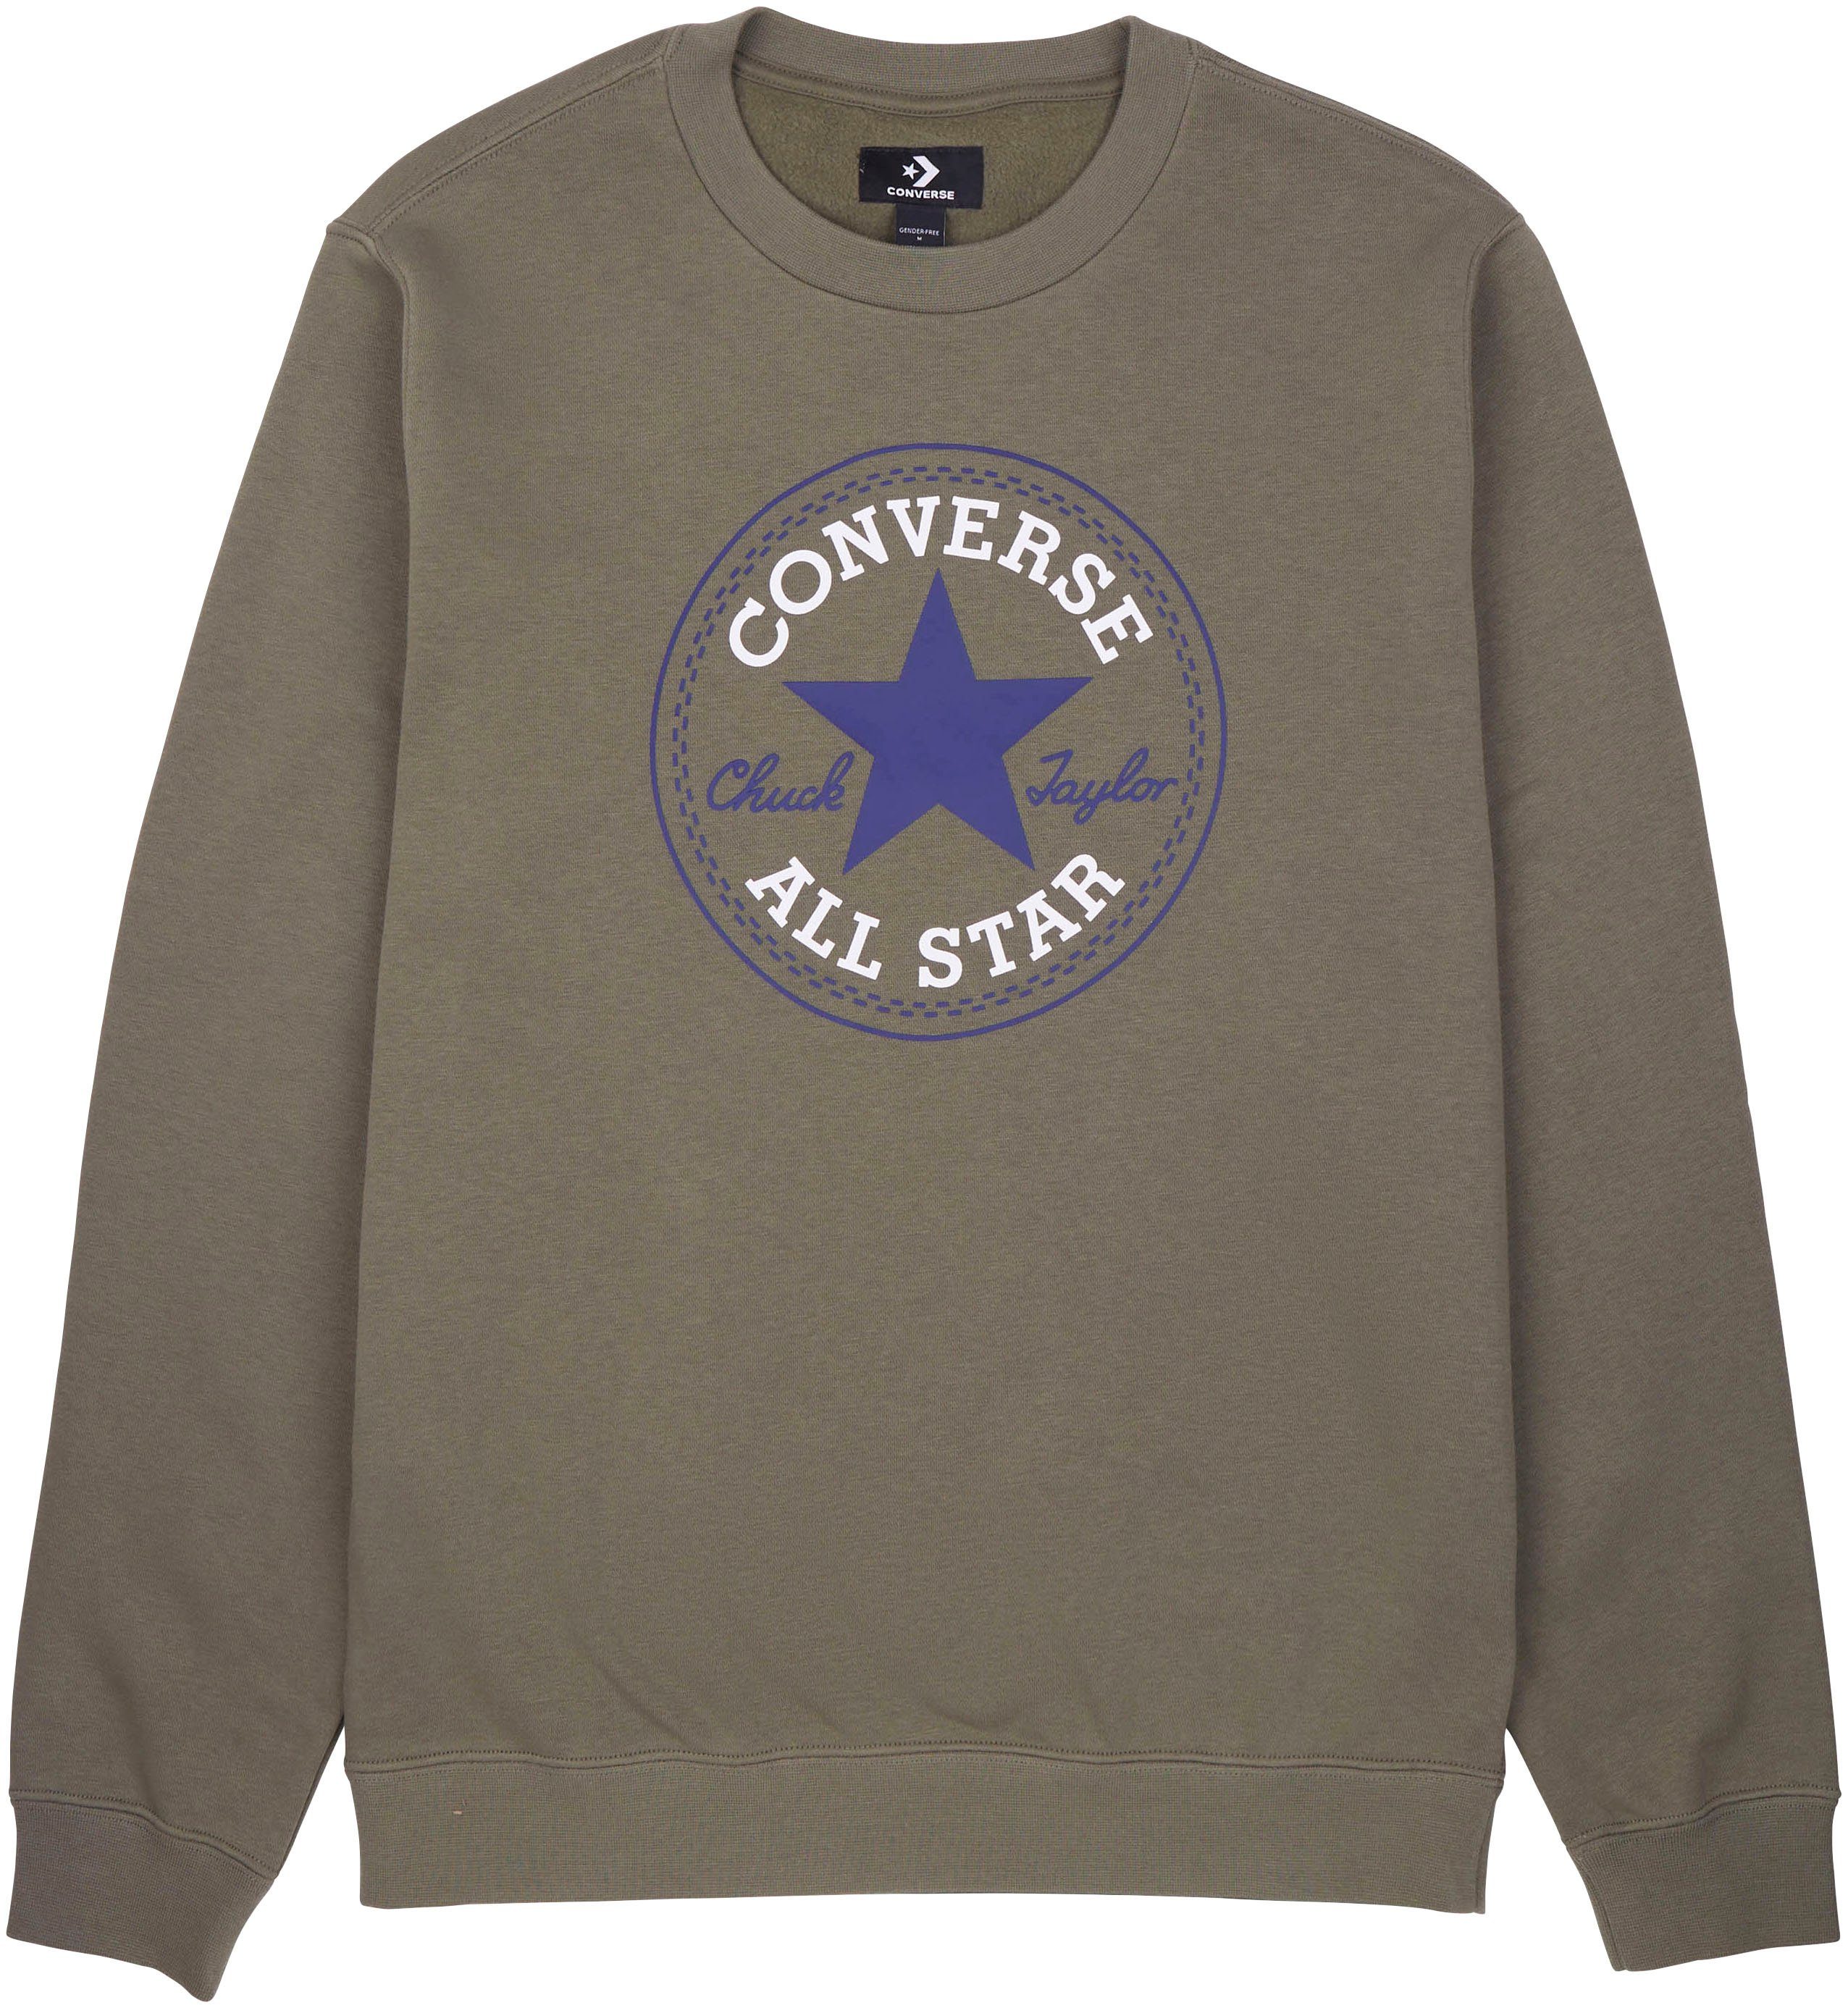 Converse Sweatshirt UNISEX ALL olive BACK PATCH BRUSHED STAR